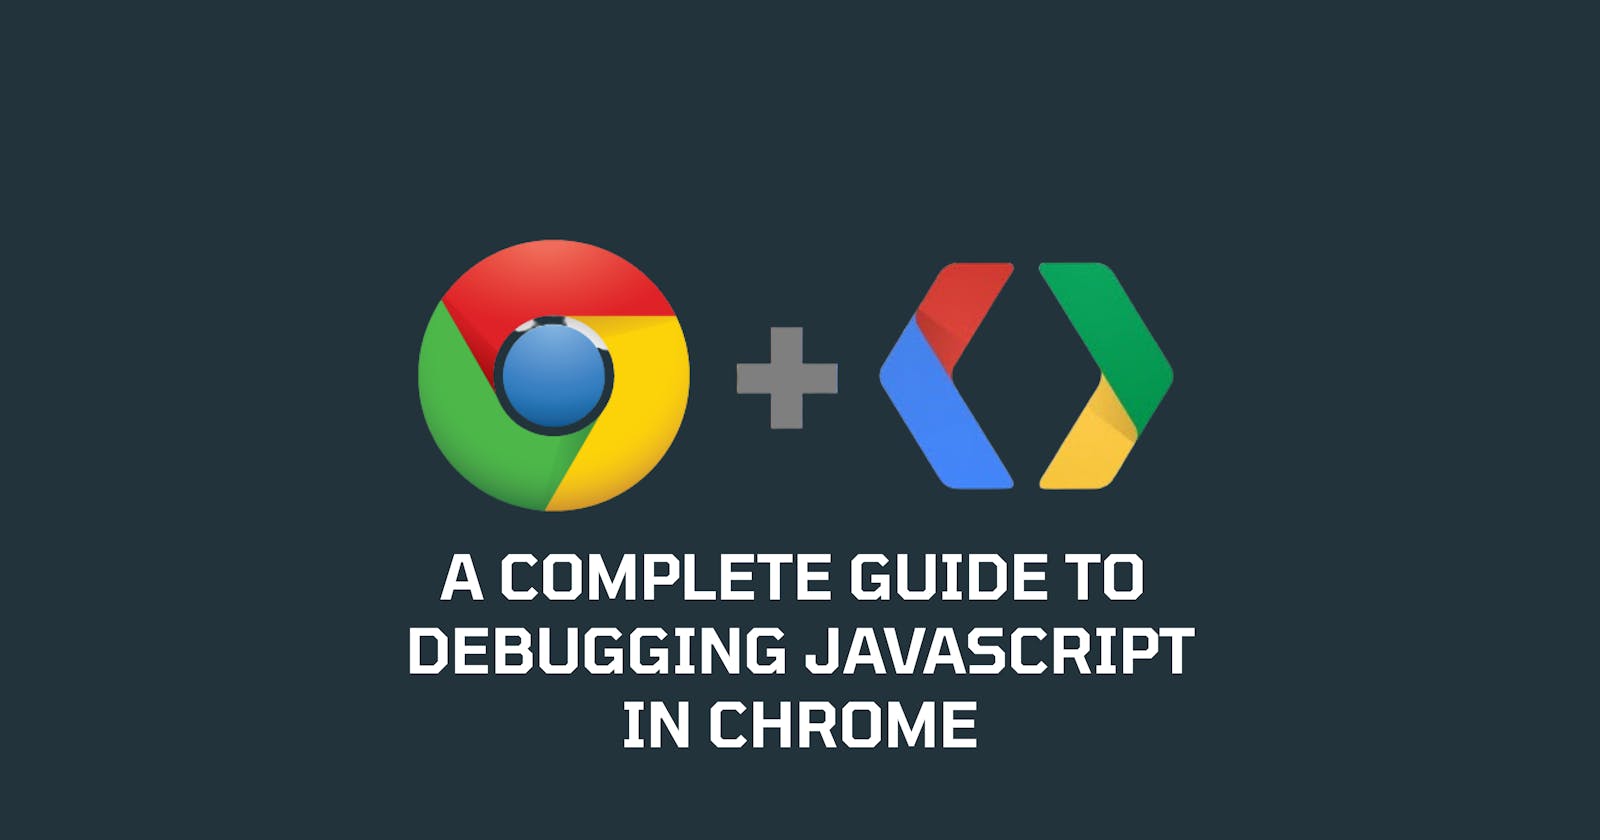 A Complete Guide to Debugging Javascript in Chrome